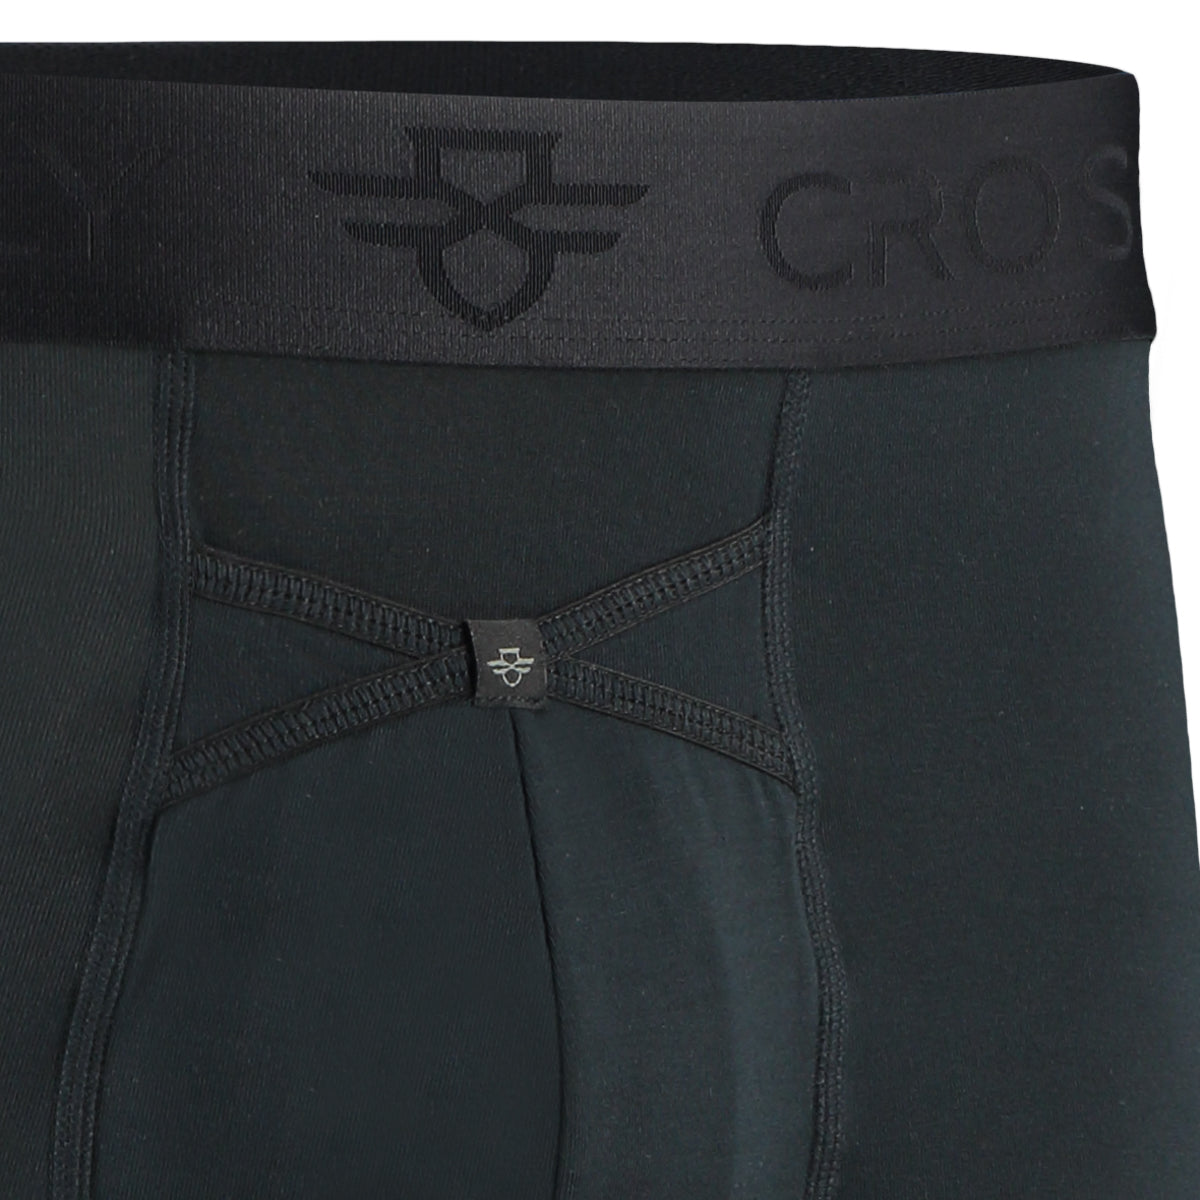 IKON Boxers in black modal fabric. A zoomed in photo to show the details.